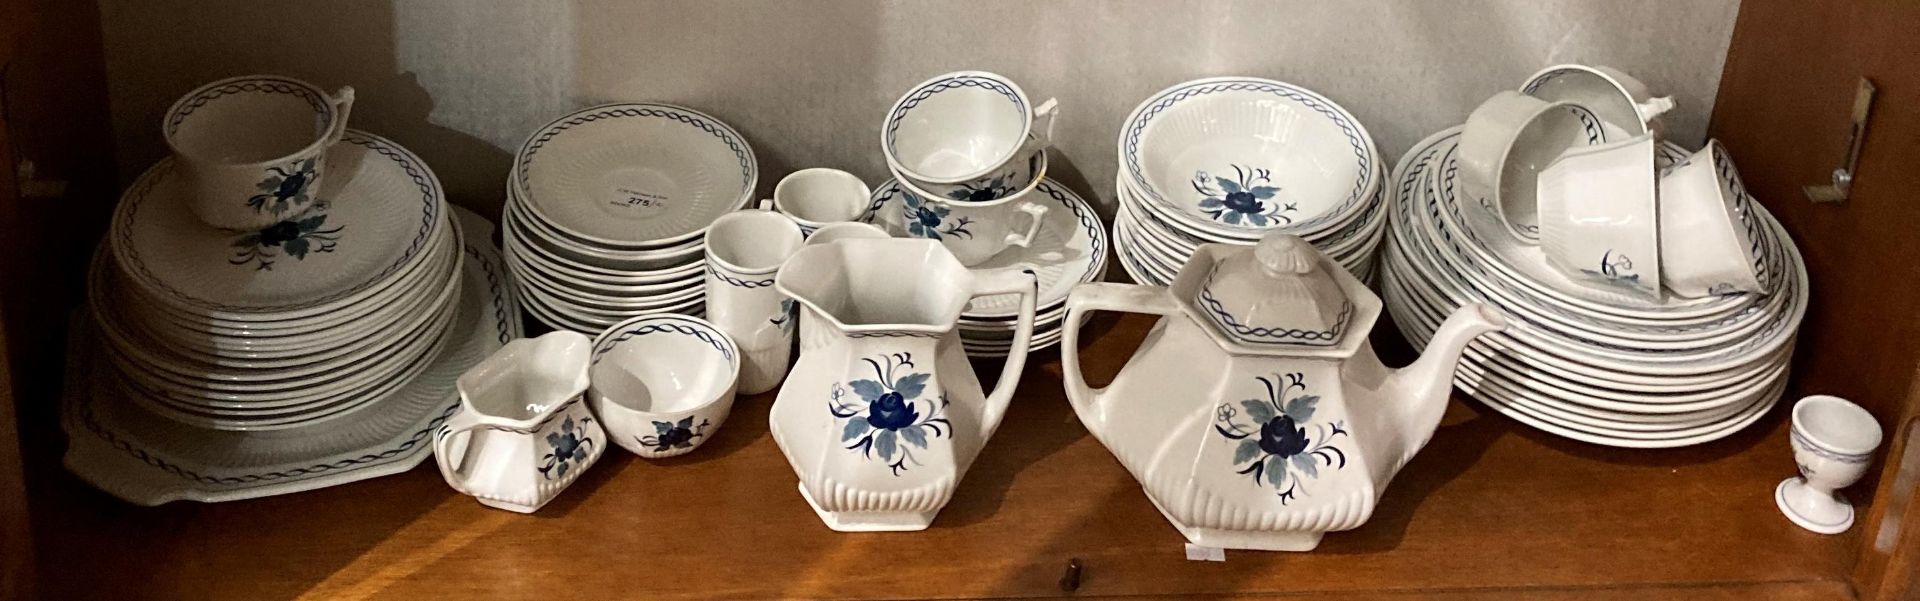 Seventy pieces of "Baltic" part dinner set by Adams